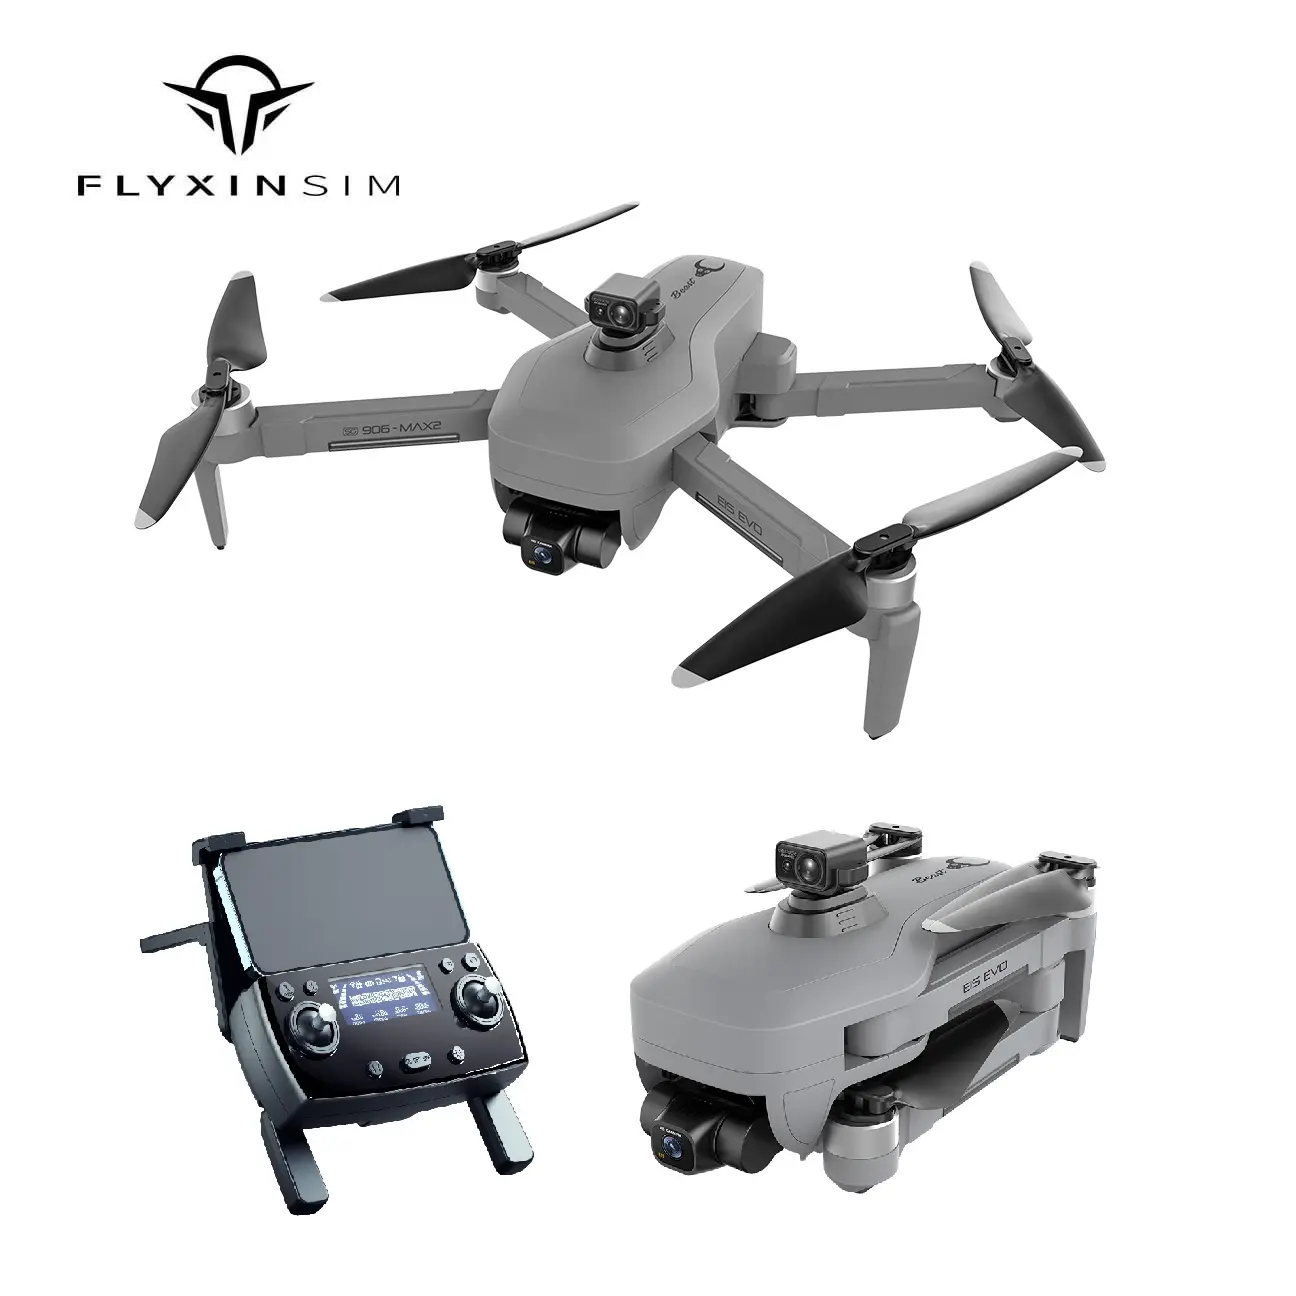 Flyxinsim Vtol UAV Drone SG906Max2,Surveillance 4K Drone 4Km Long Distance,BLDC Motor Drone With 4K Camera And GPS 3 Axis Gimbal